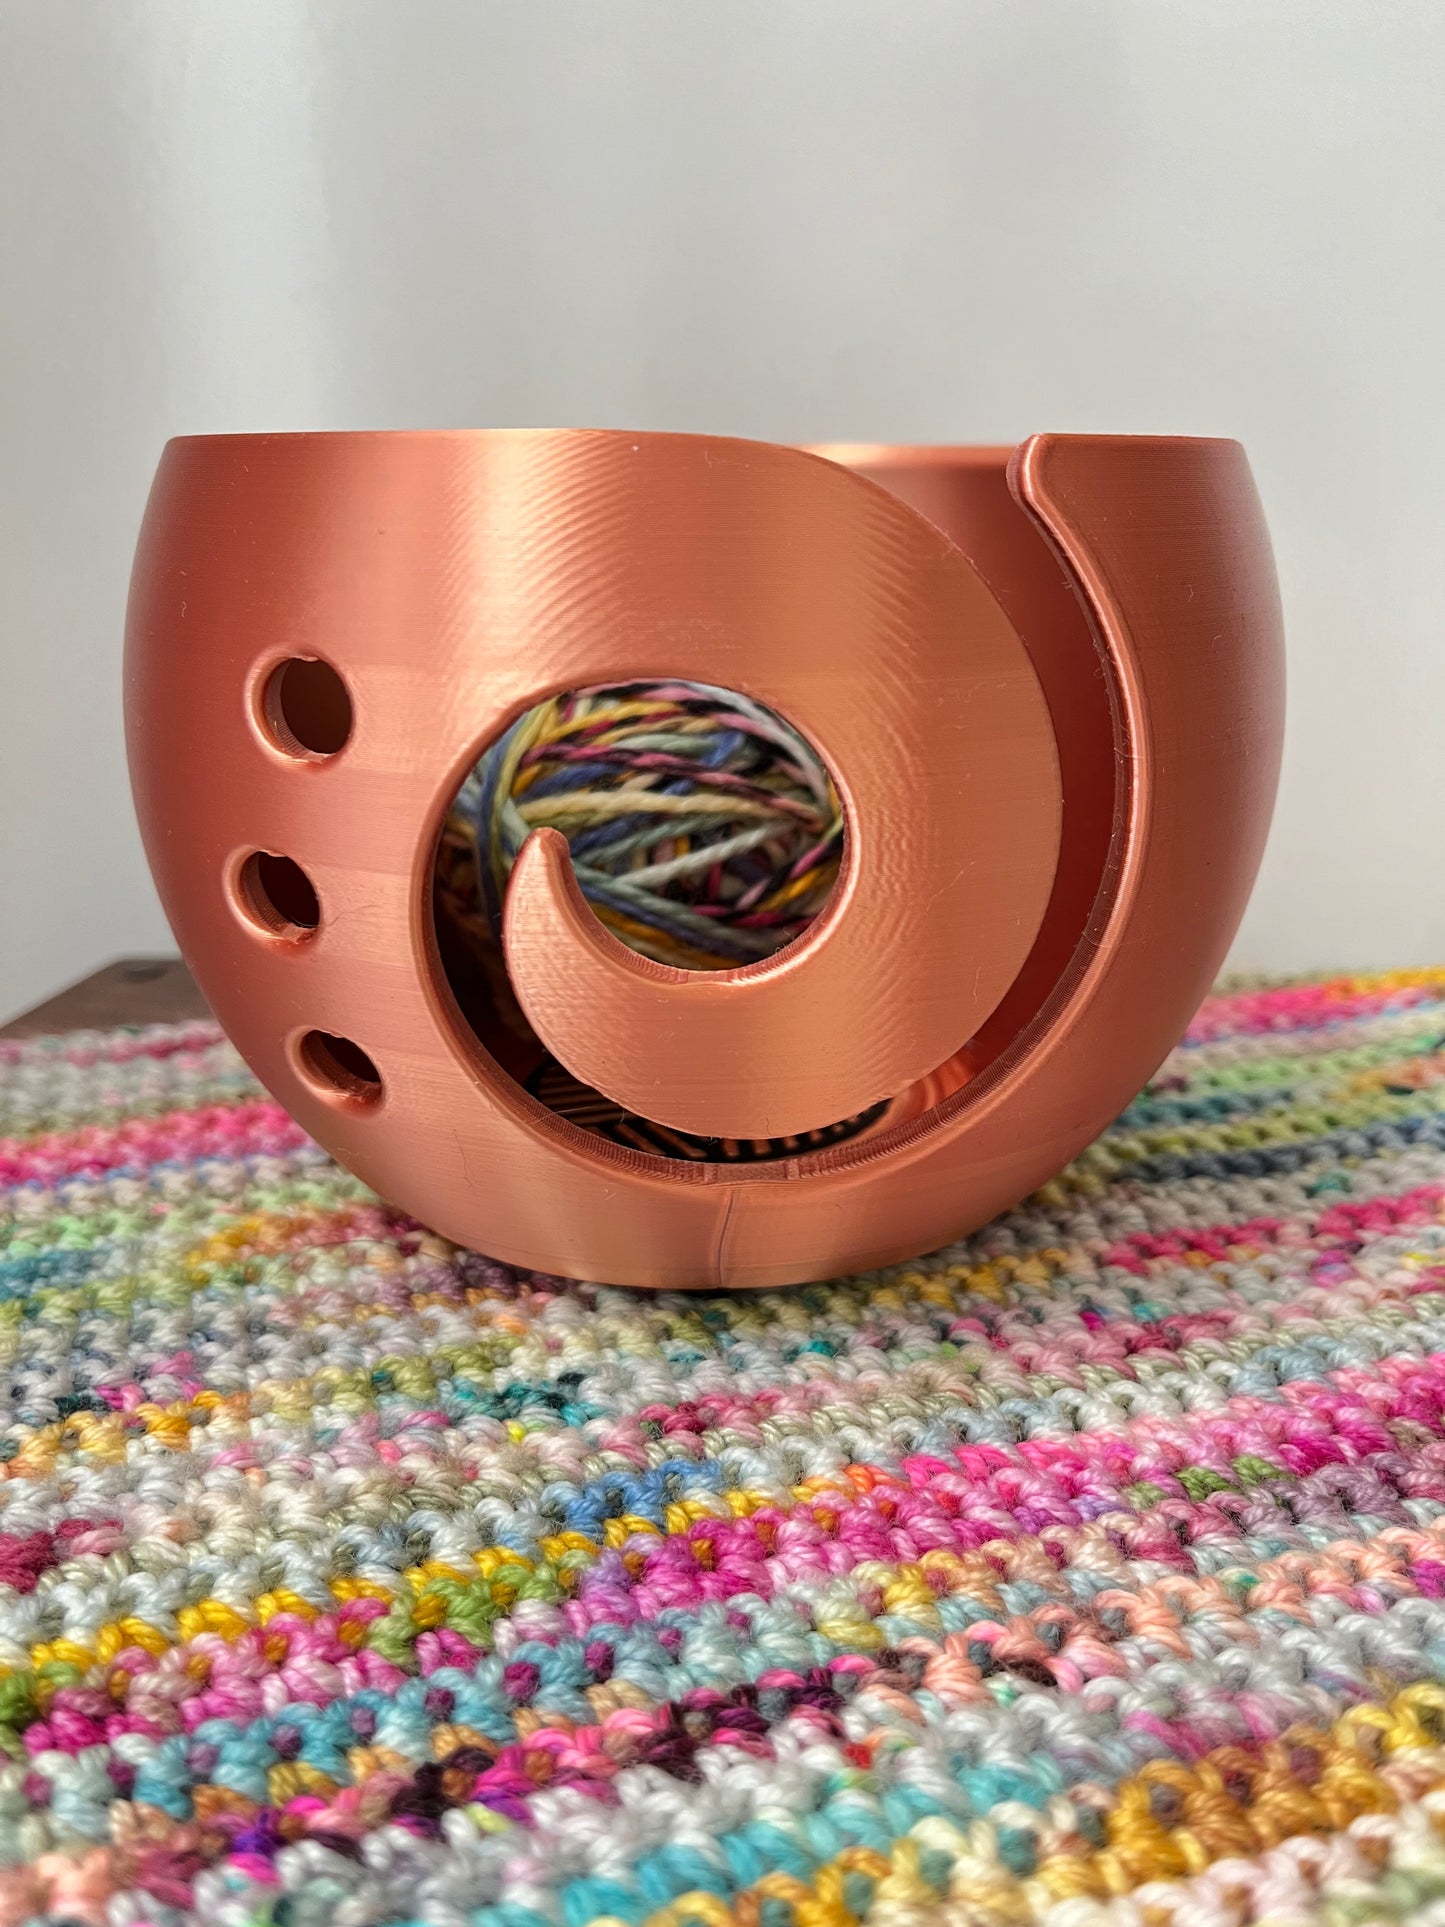 3D Printed Yarn Bowl for Yarn Crafts, Choose Your Colour